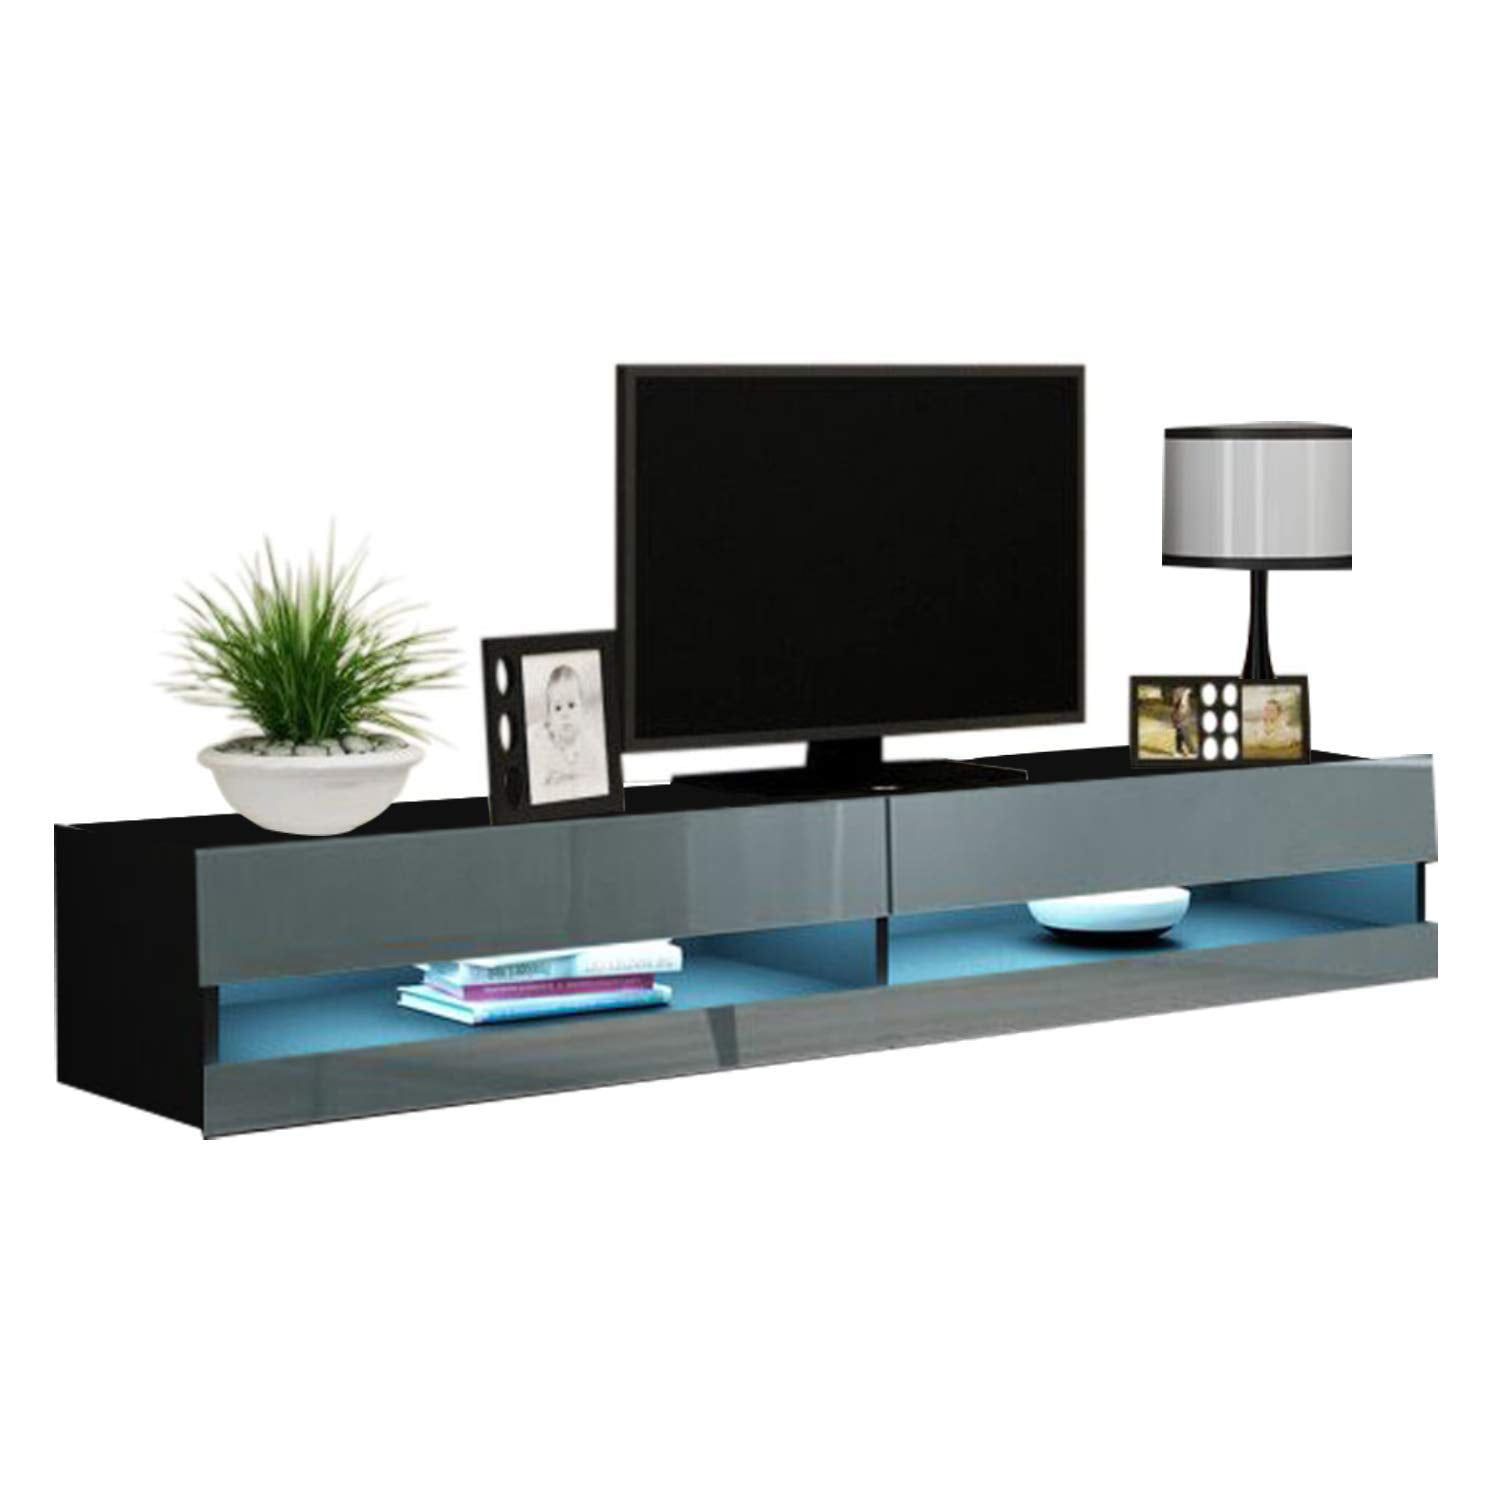 Vigo New 180 Led Wall Mounted 71" Floating Tv Stand, Black/gray Inside Wall Mounted Floating Tv Stands (View 19 of 20)